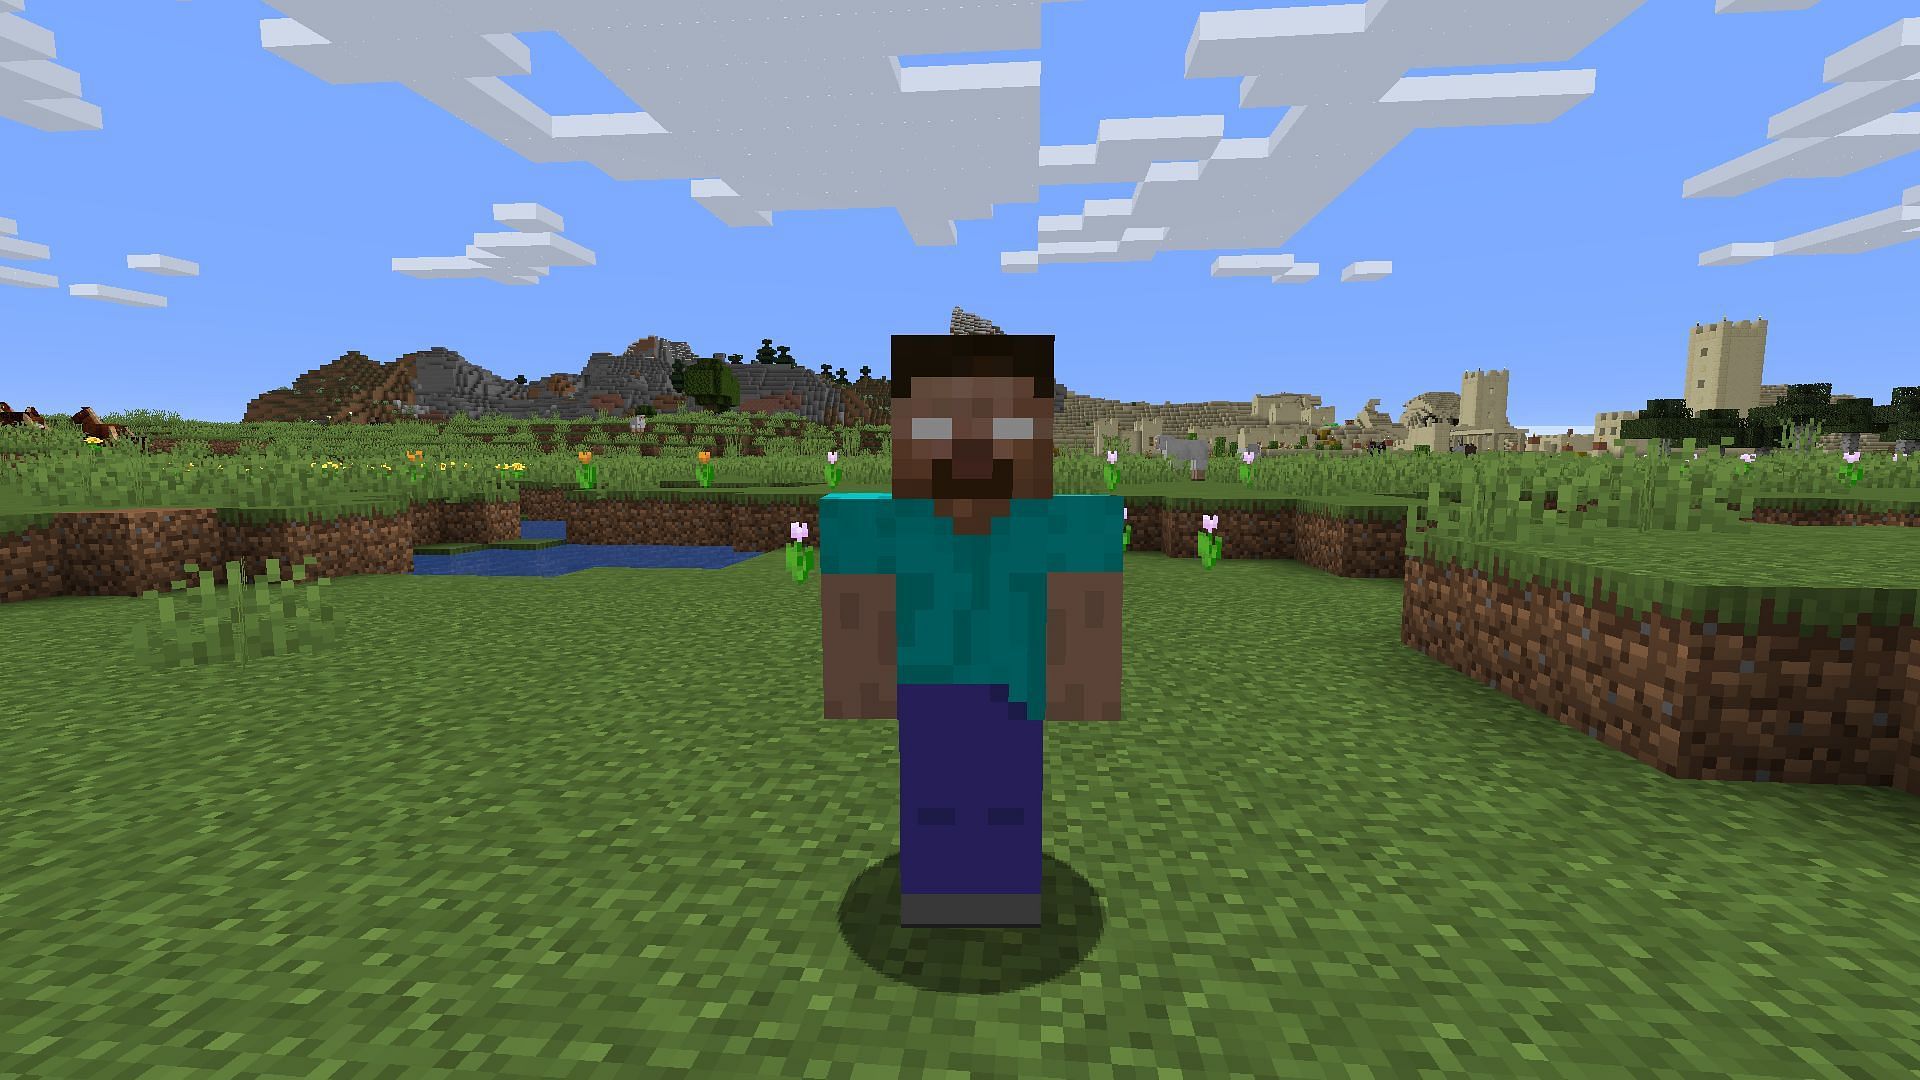 Herobrine is a mythical and fictional character that is not present in single-player worlds (Image via CurseForge)